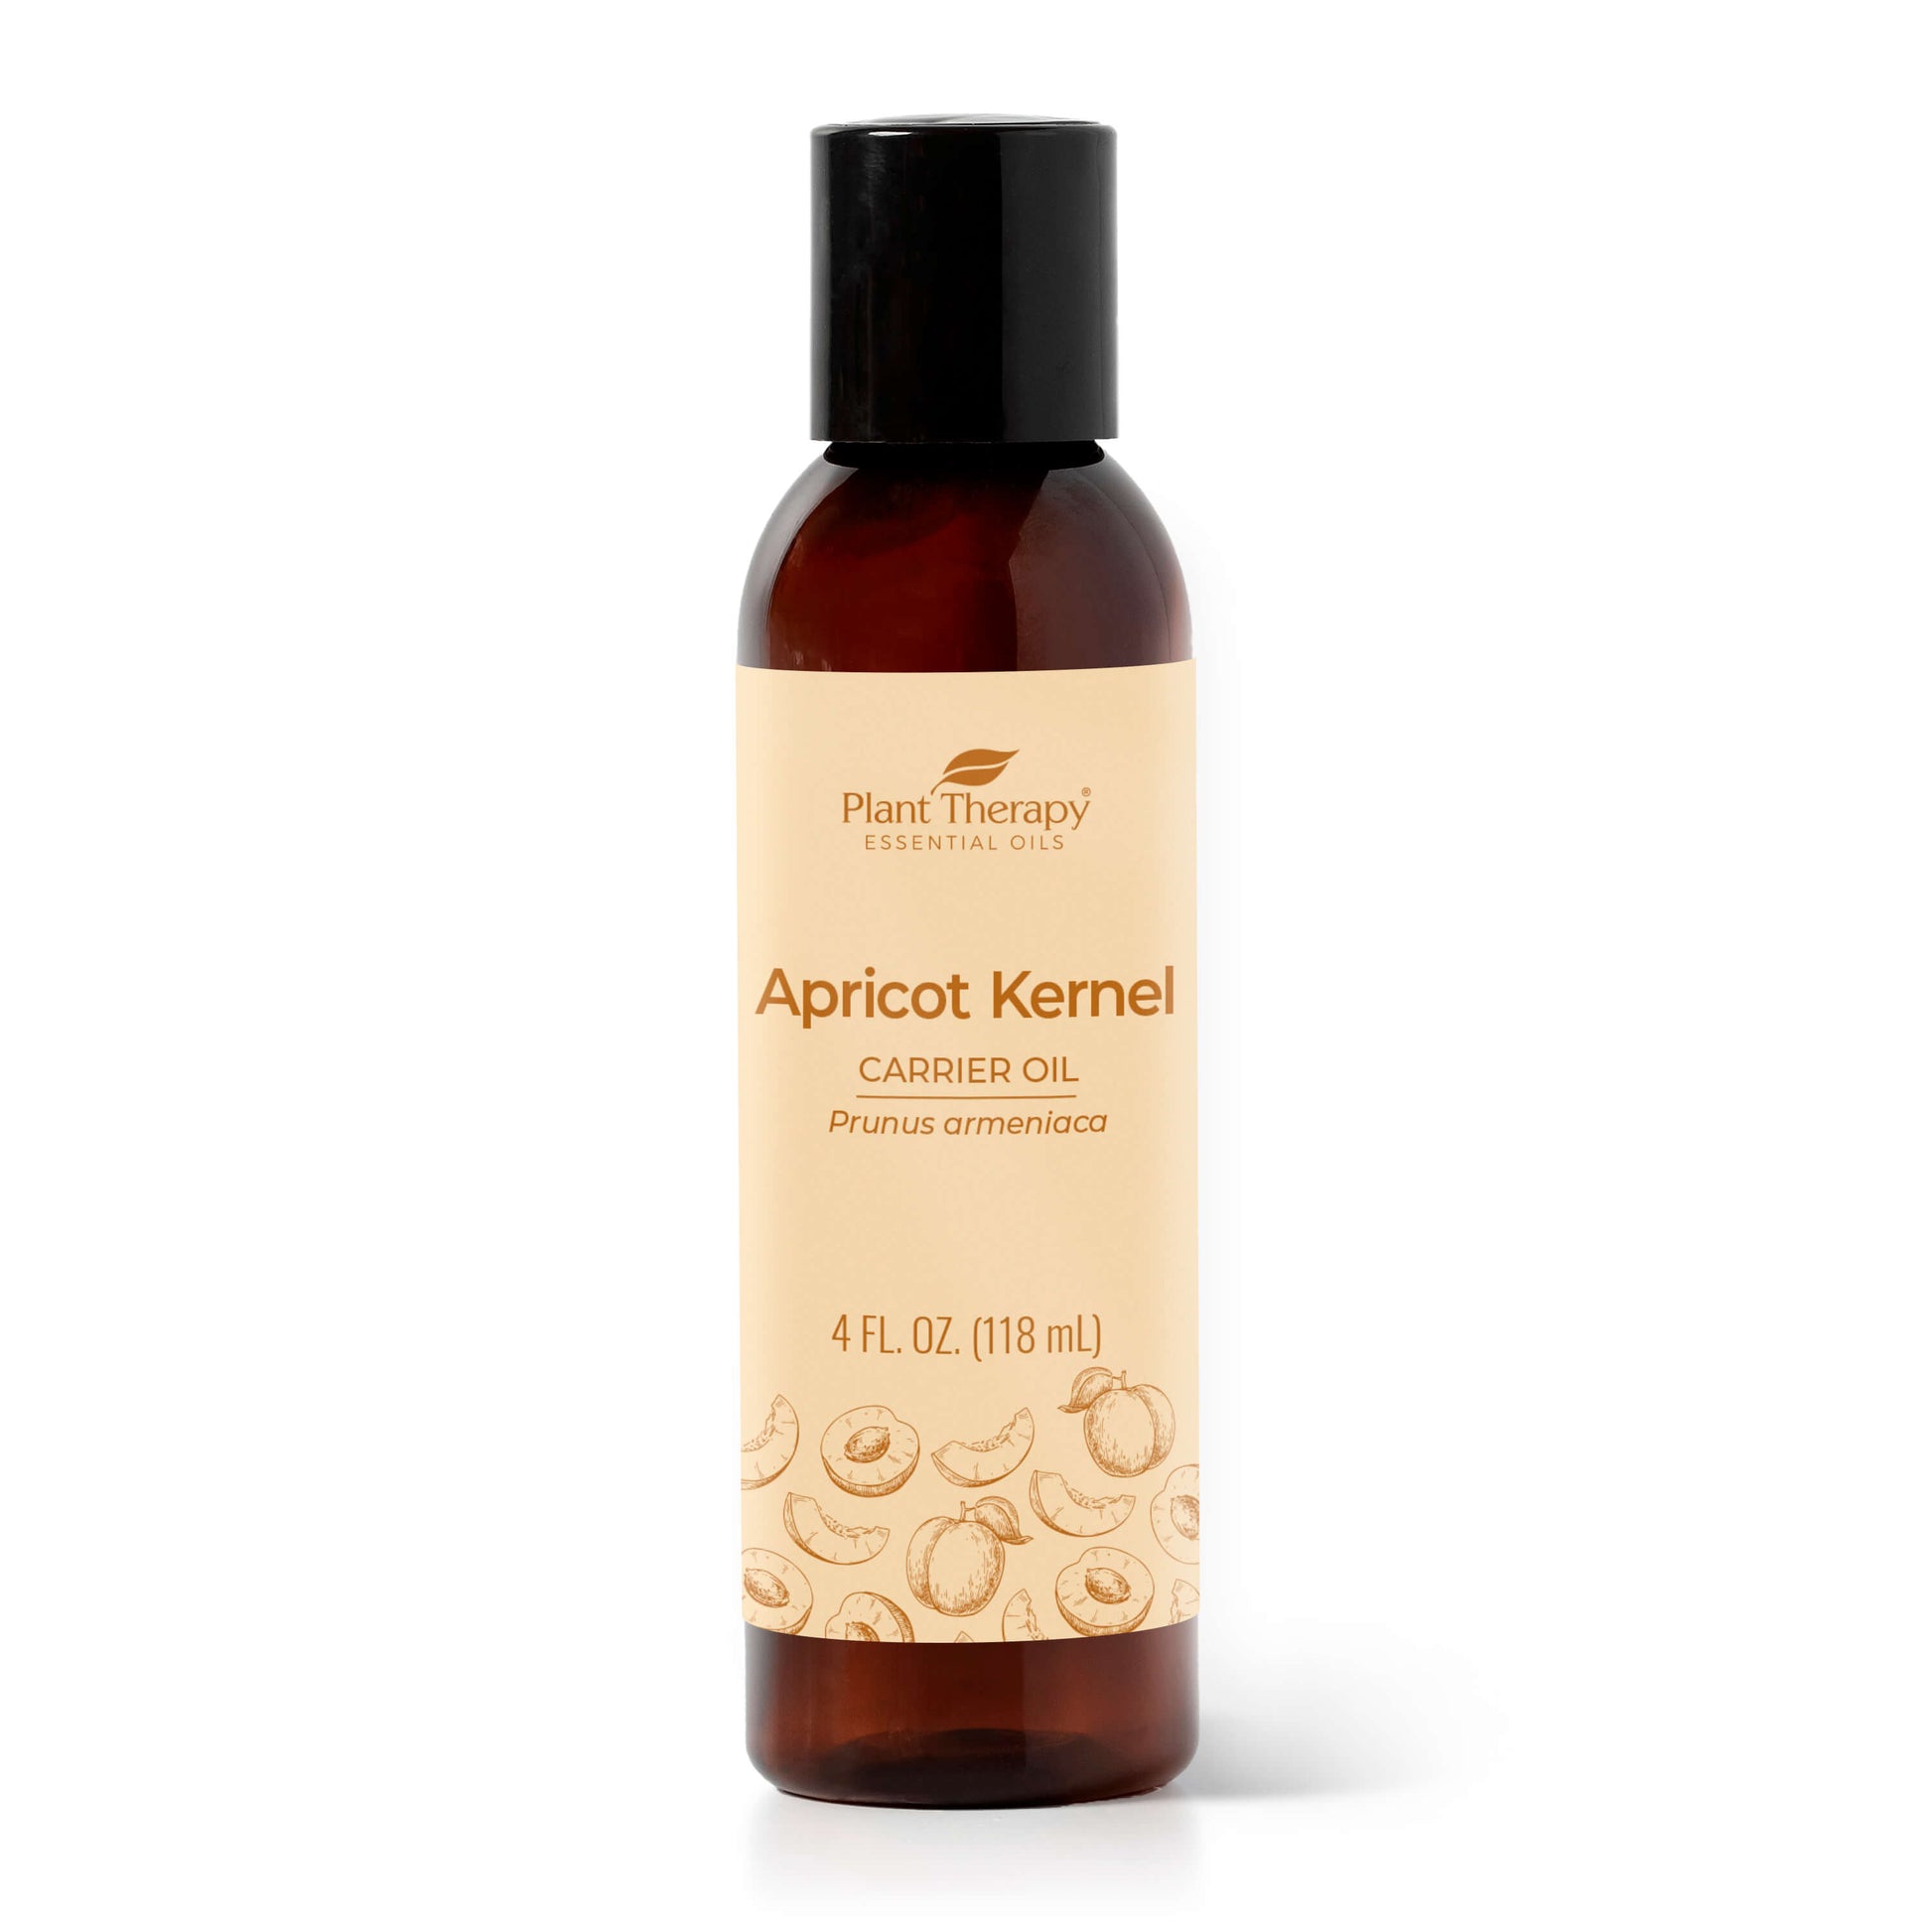 Plant Therapy Apricot Kernel Carrier Oil Base Oil for Aromatherapy, Essential Oil or Massage Use